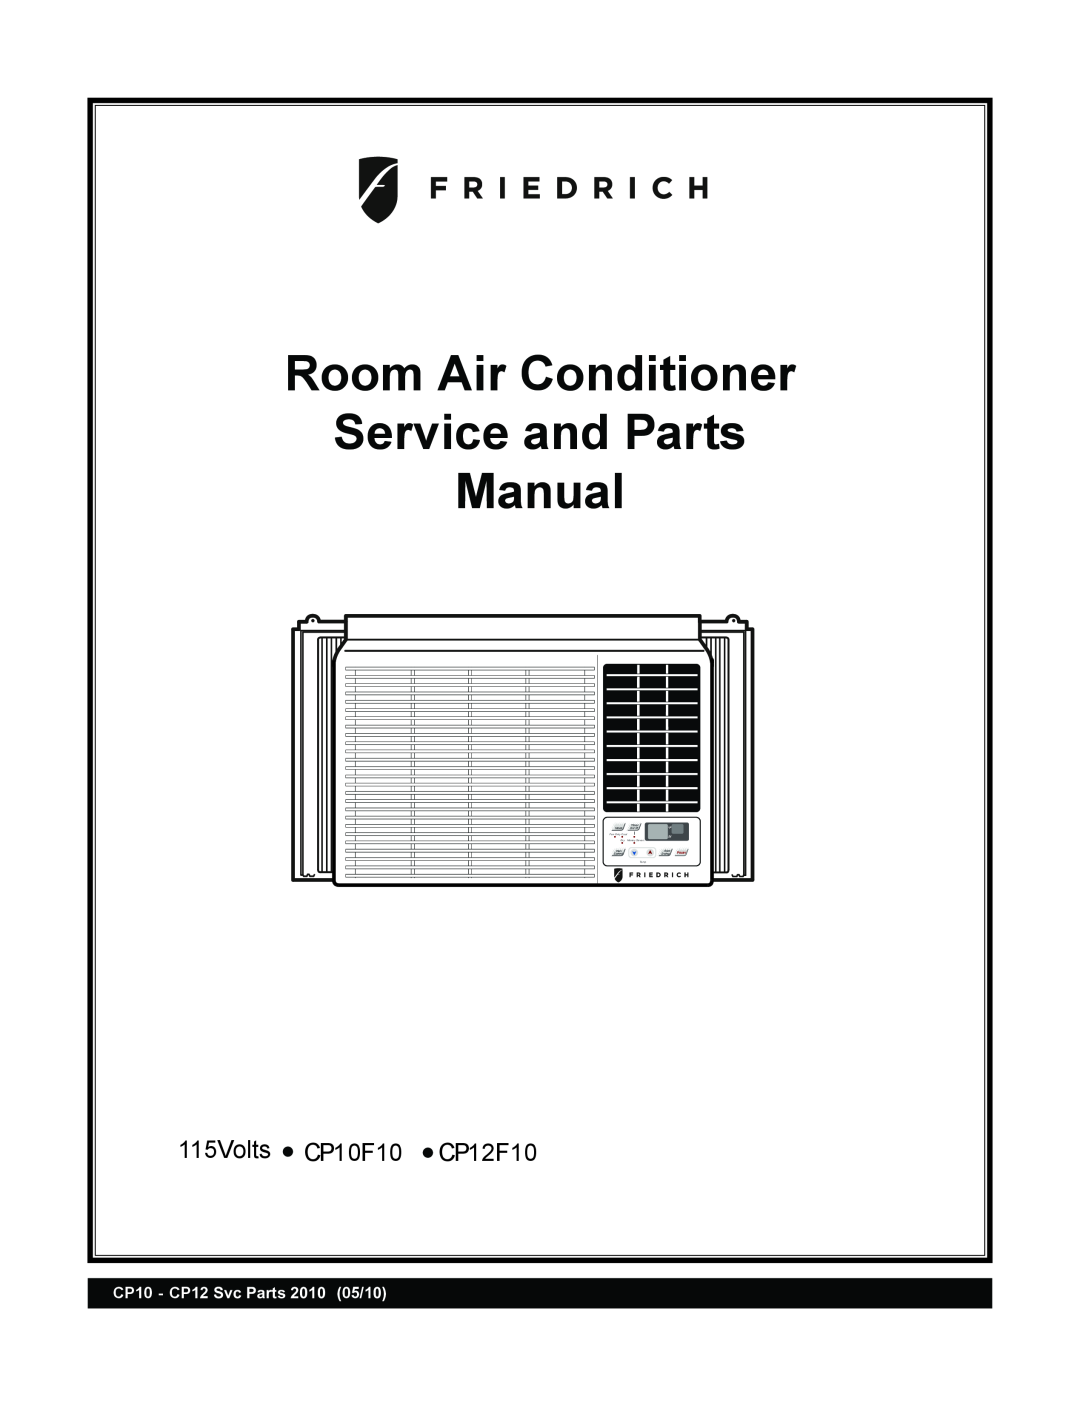 Friedrich CP10F10 manual Room Air Conditioner, Service and Parts, Manual, 115Volts, CP12F10, Mode, Timer, 0n/ 0ff, Auto 